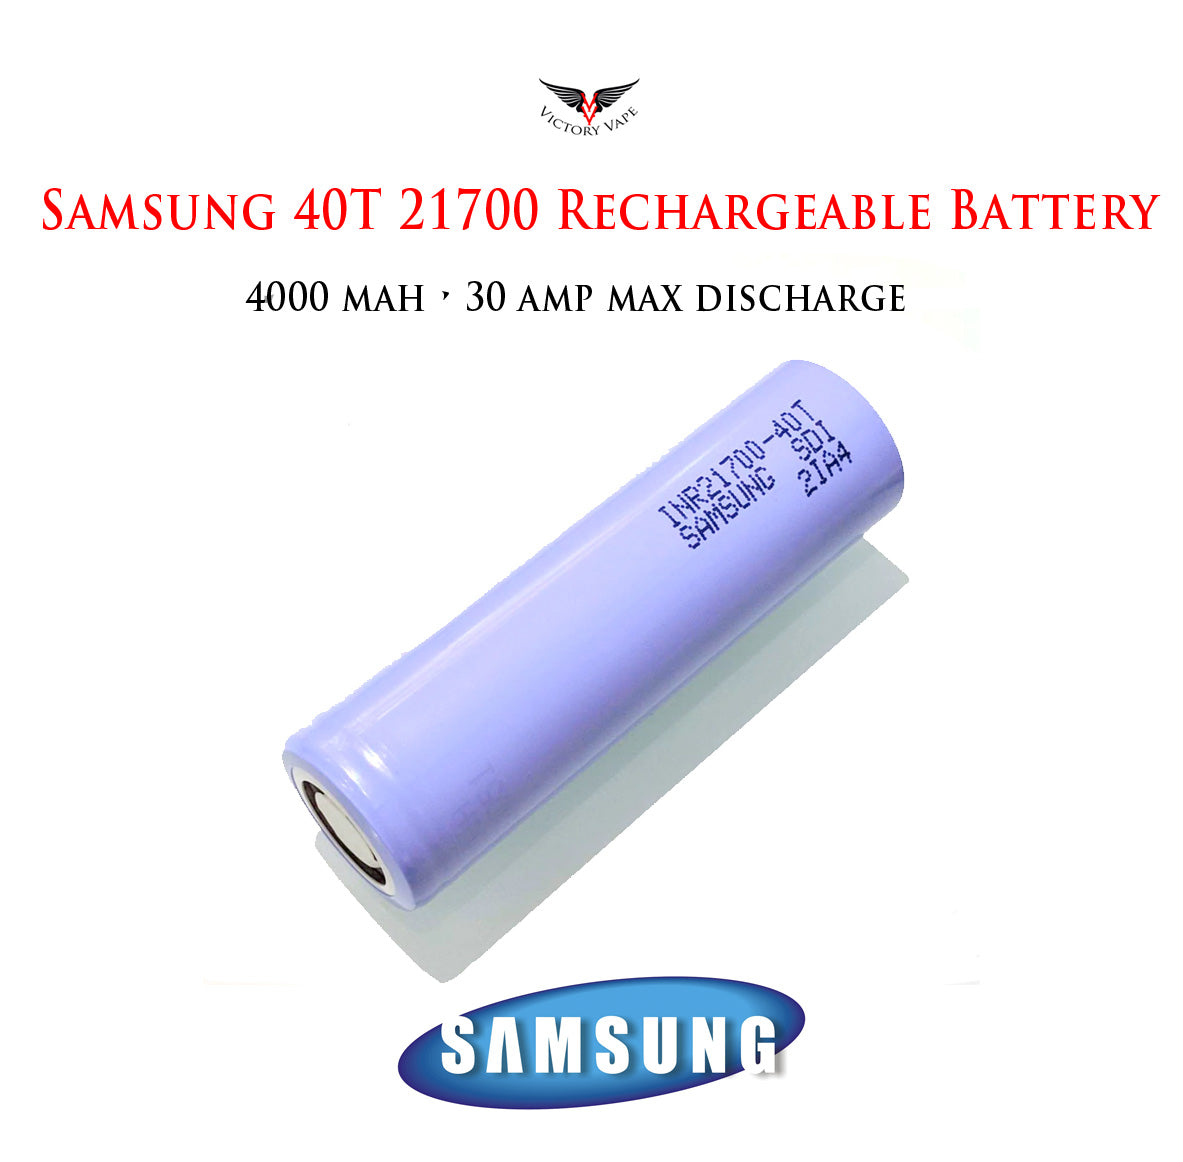  Samsung 40T 21700 • 4000mAh 30A rechargeable battery 